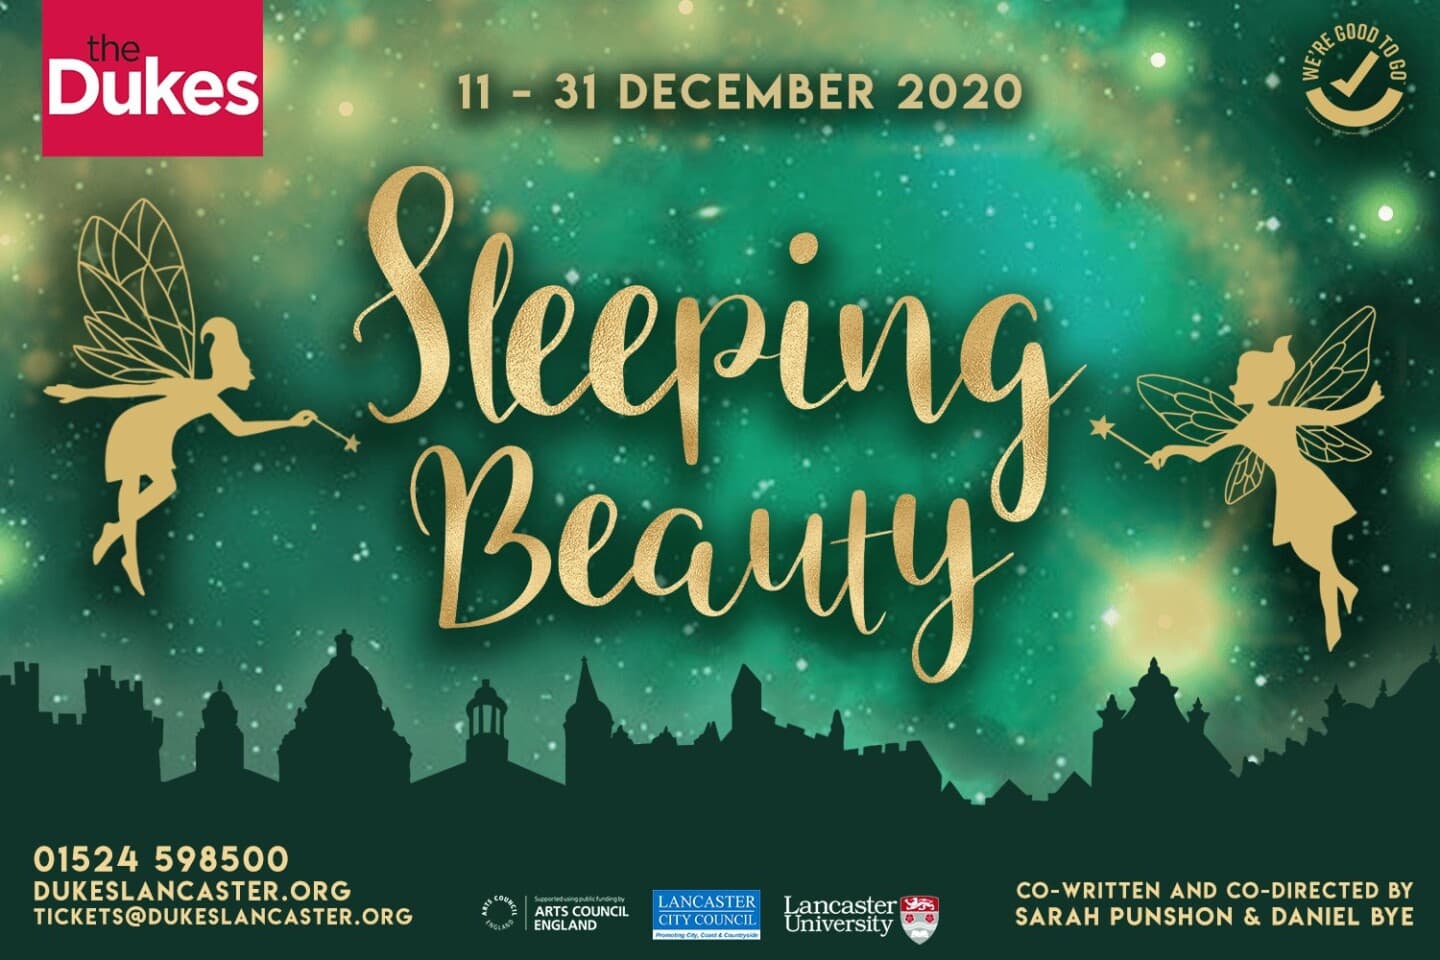 Festive Cheer with Sleeping Beauty at The Dukes